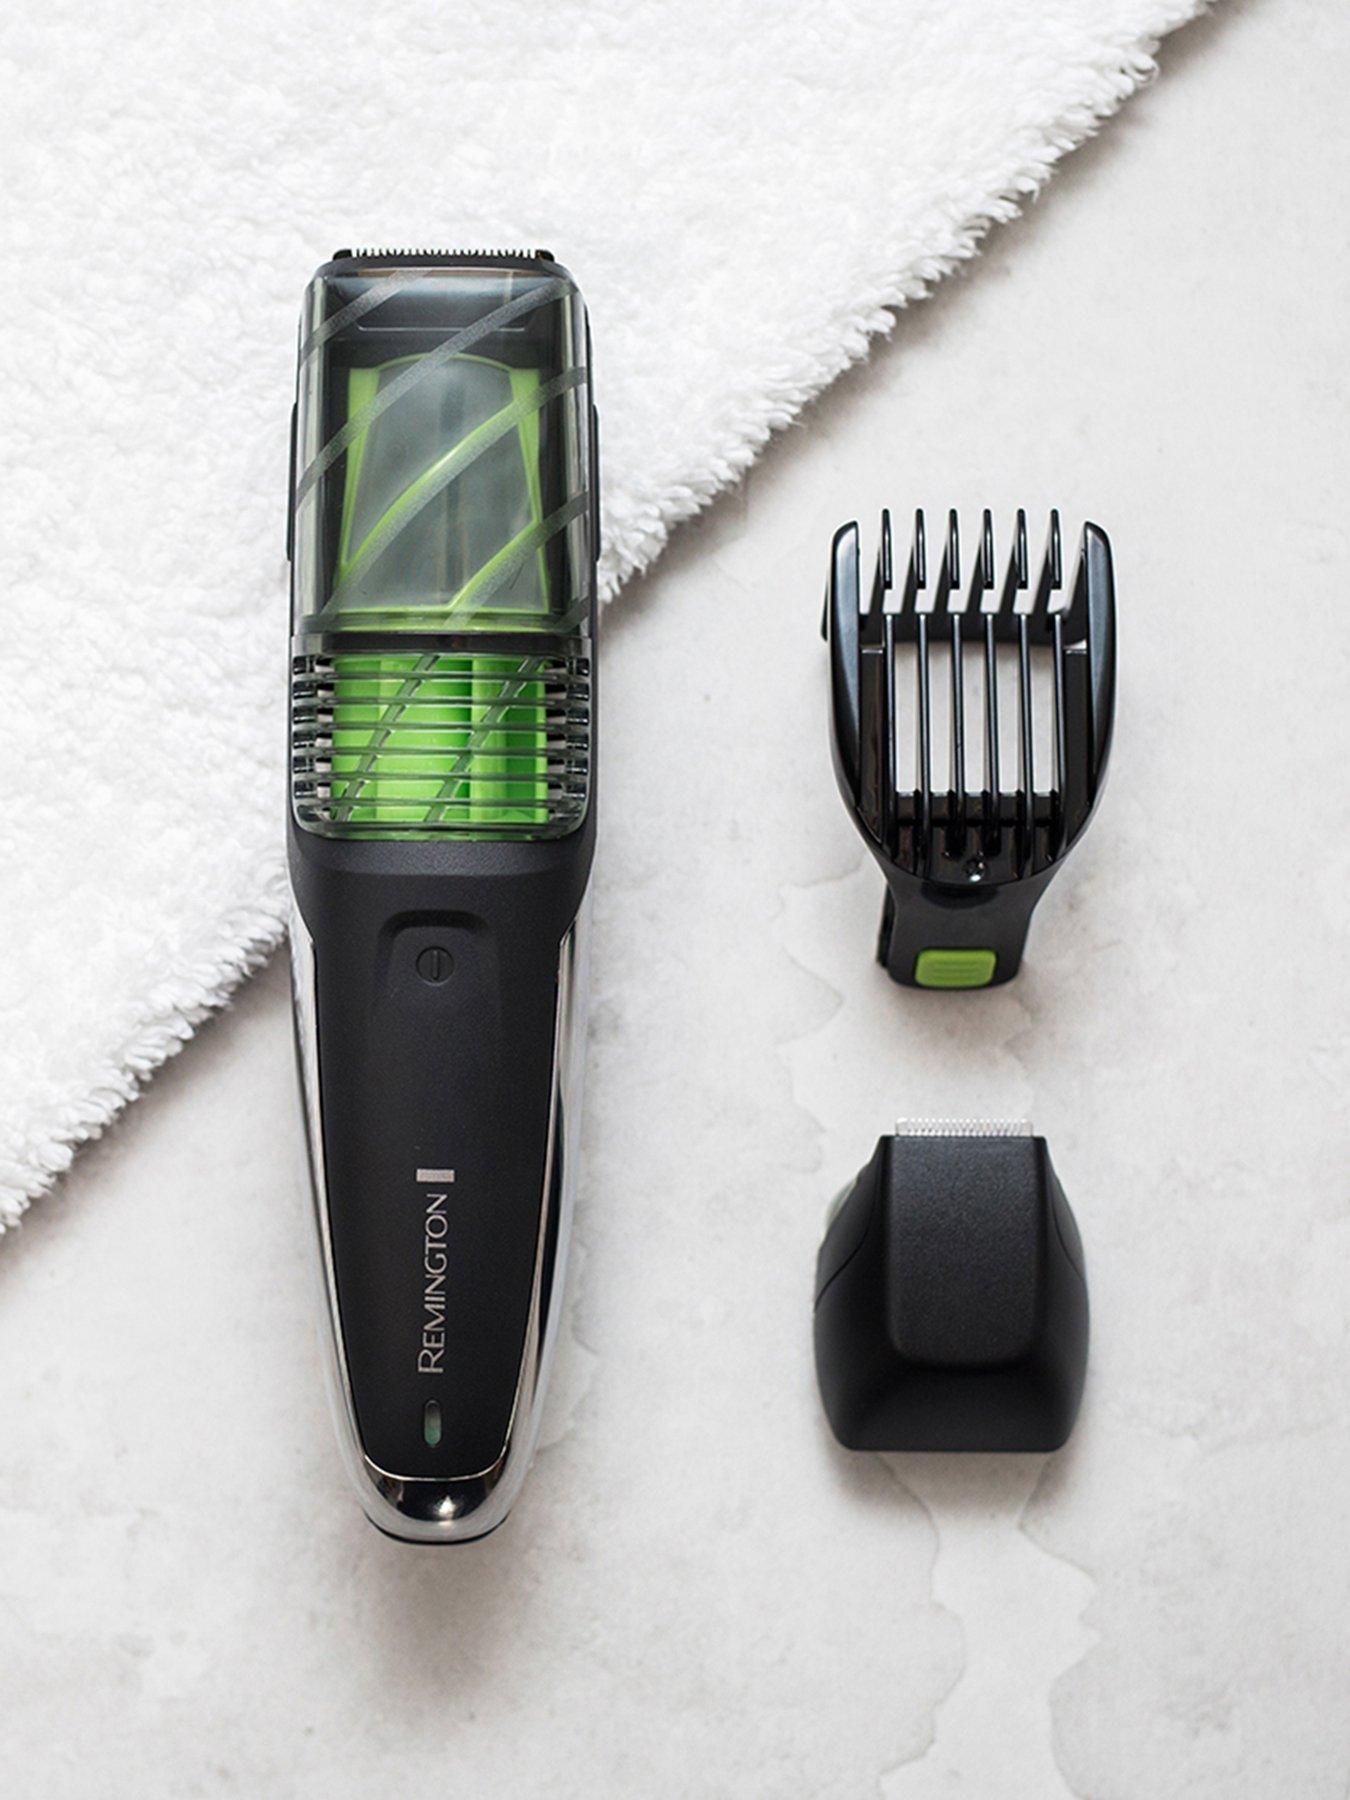 remington mb6850 stubble and beard trimmer